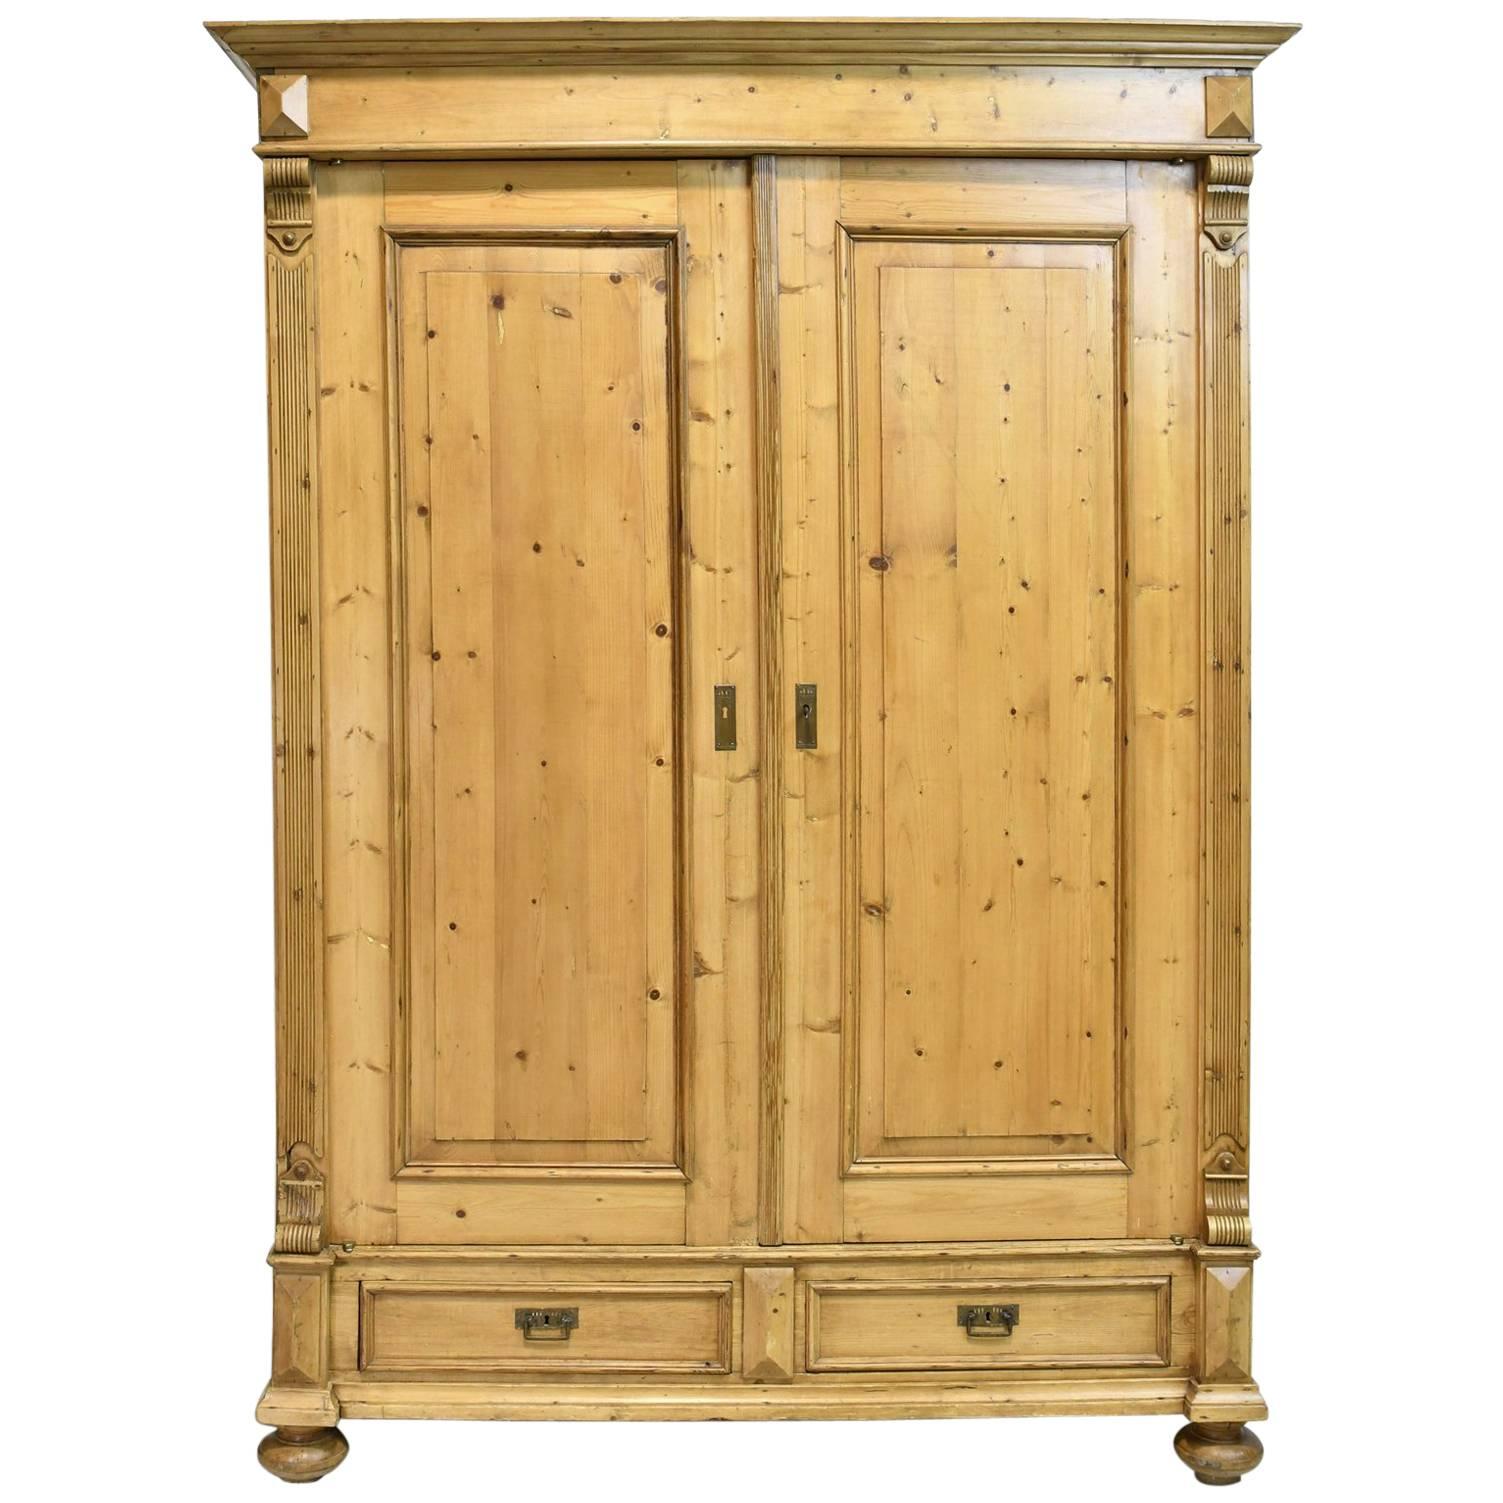 19th Century European Two-Door Armoire in Pine with Drawers & Interior Shelves